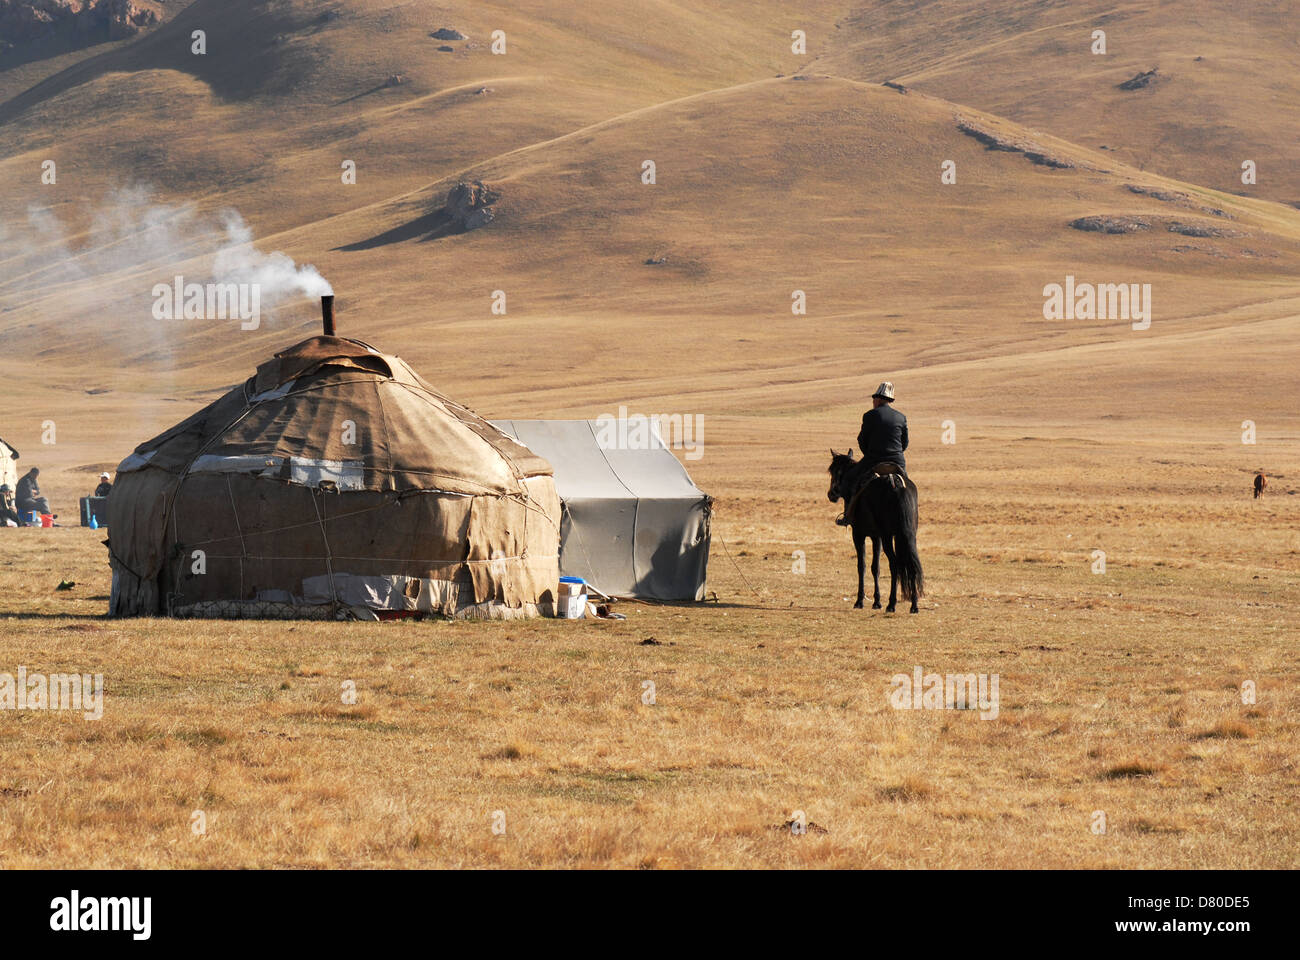 Kyrgyz man riding a black horse approaches a yurt in the highland pastures at the Song Kul lake. Naryn region, Kyrgyzstan Stock Photo